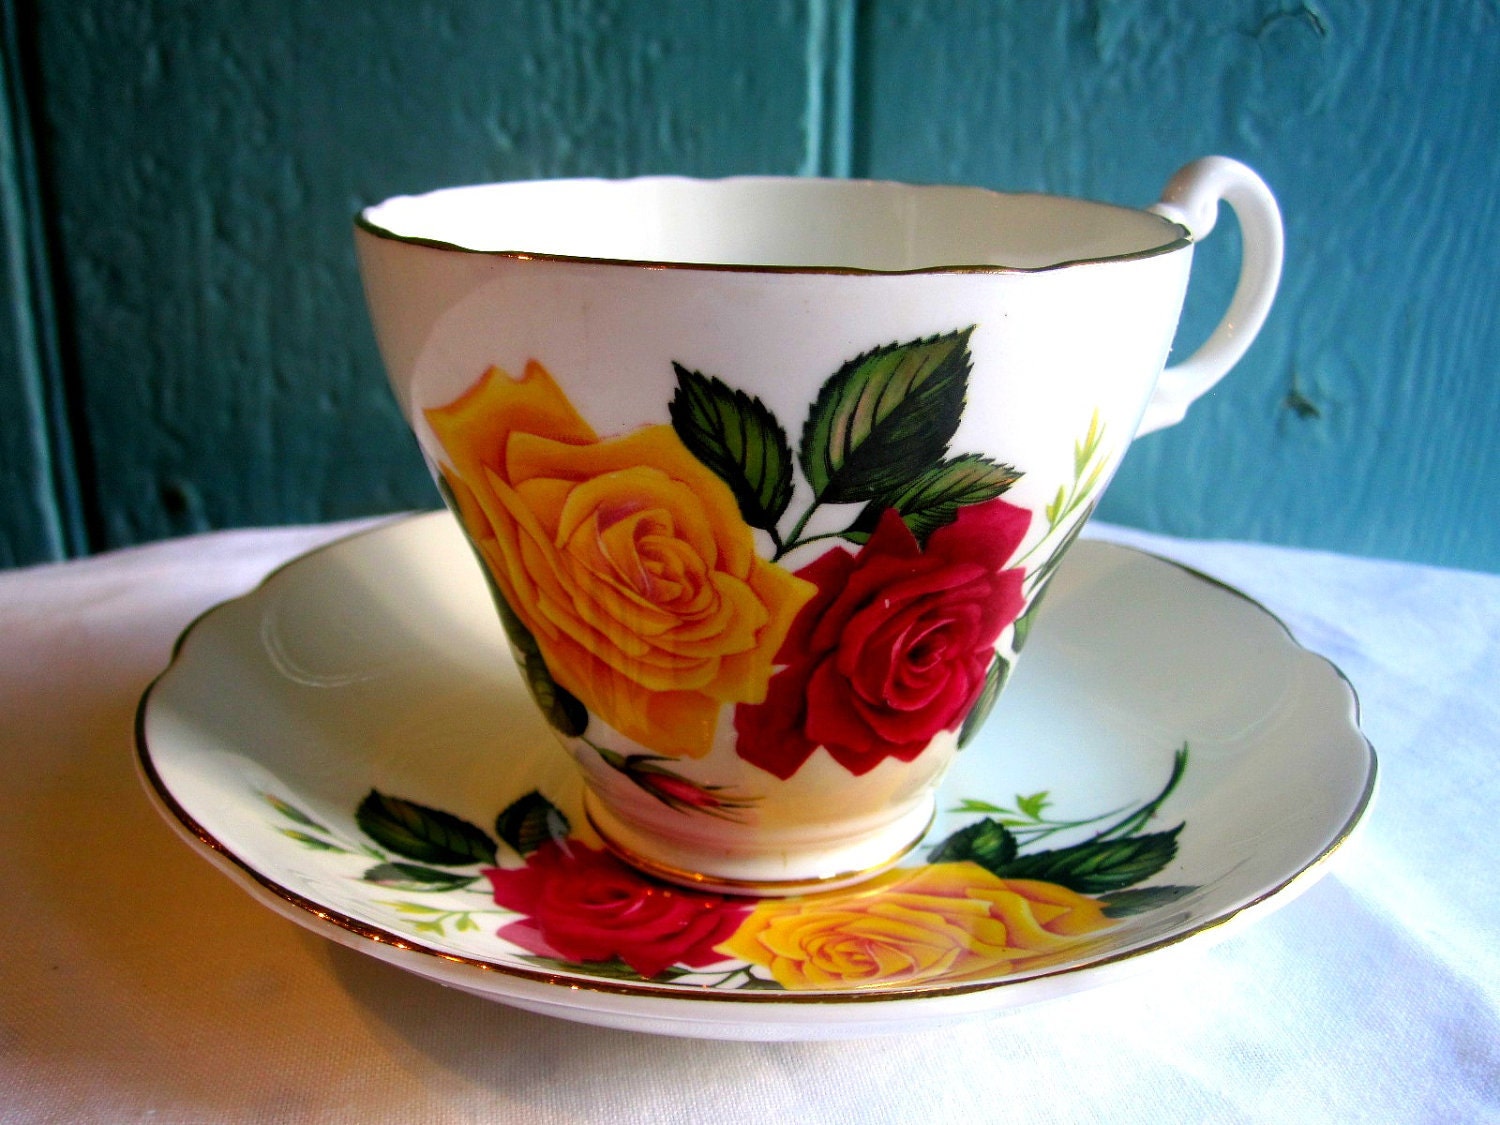 Rose by cup  Saucer cup uk Tea and Teacup TheDorothyDays English vintage Vintage tea